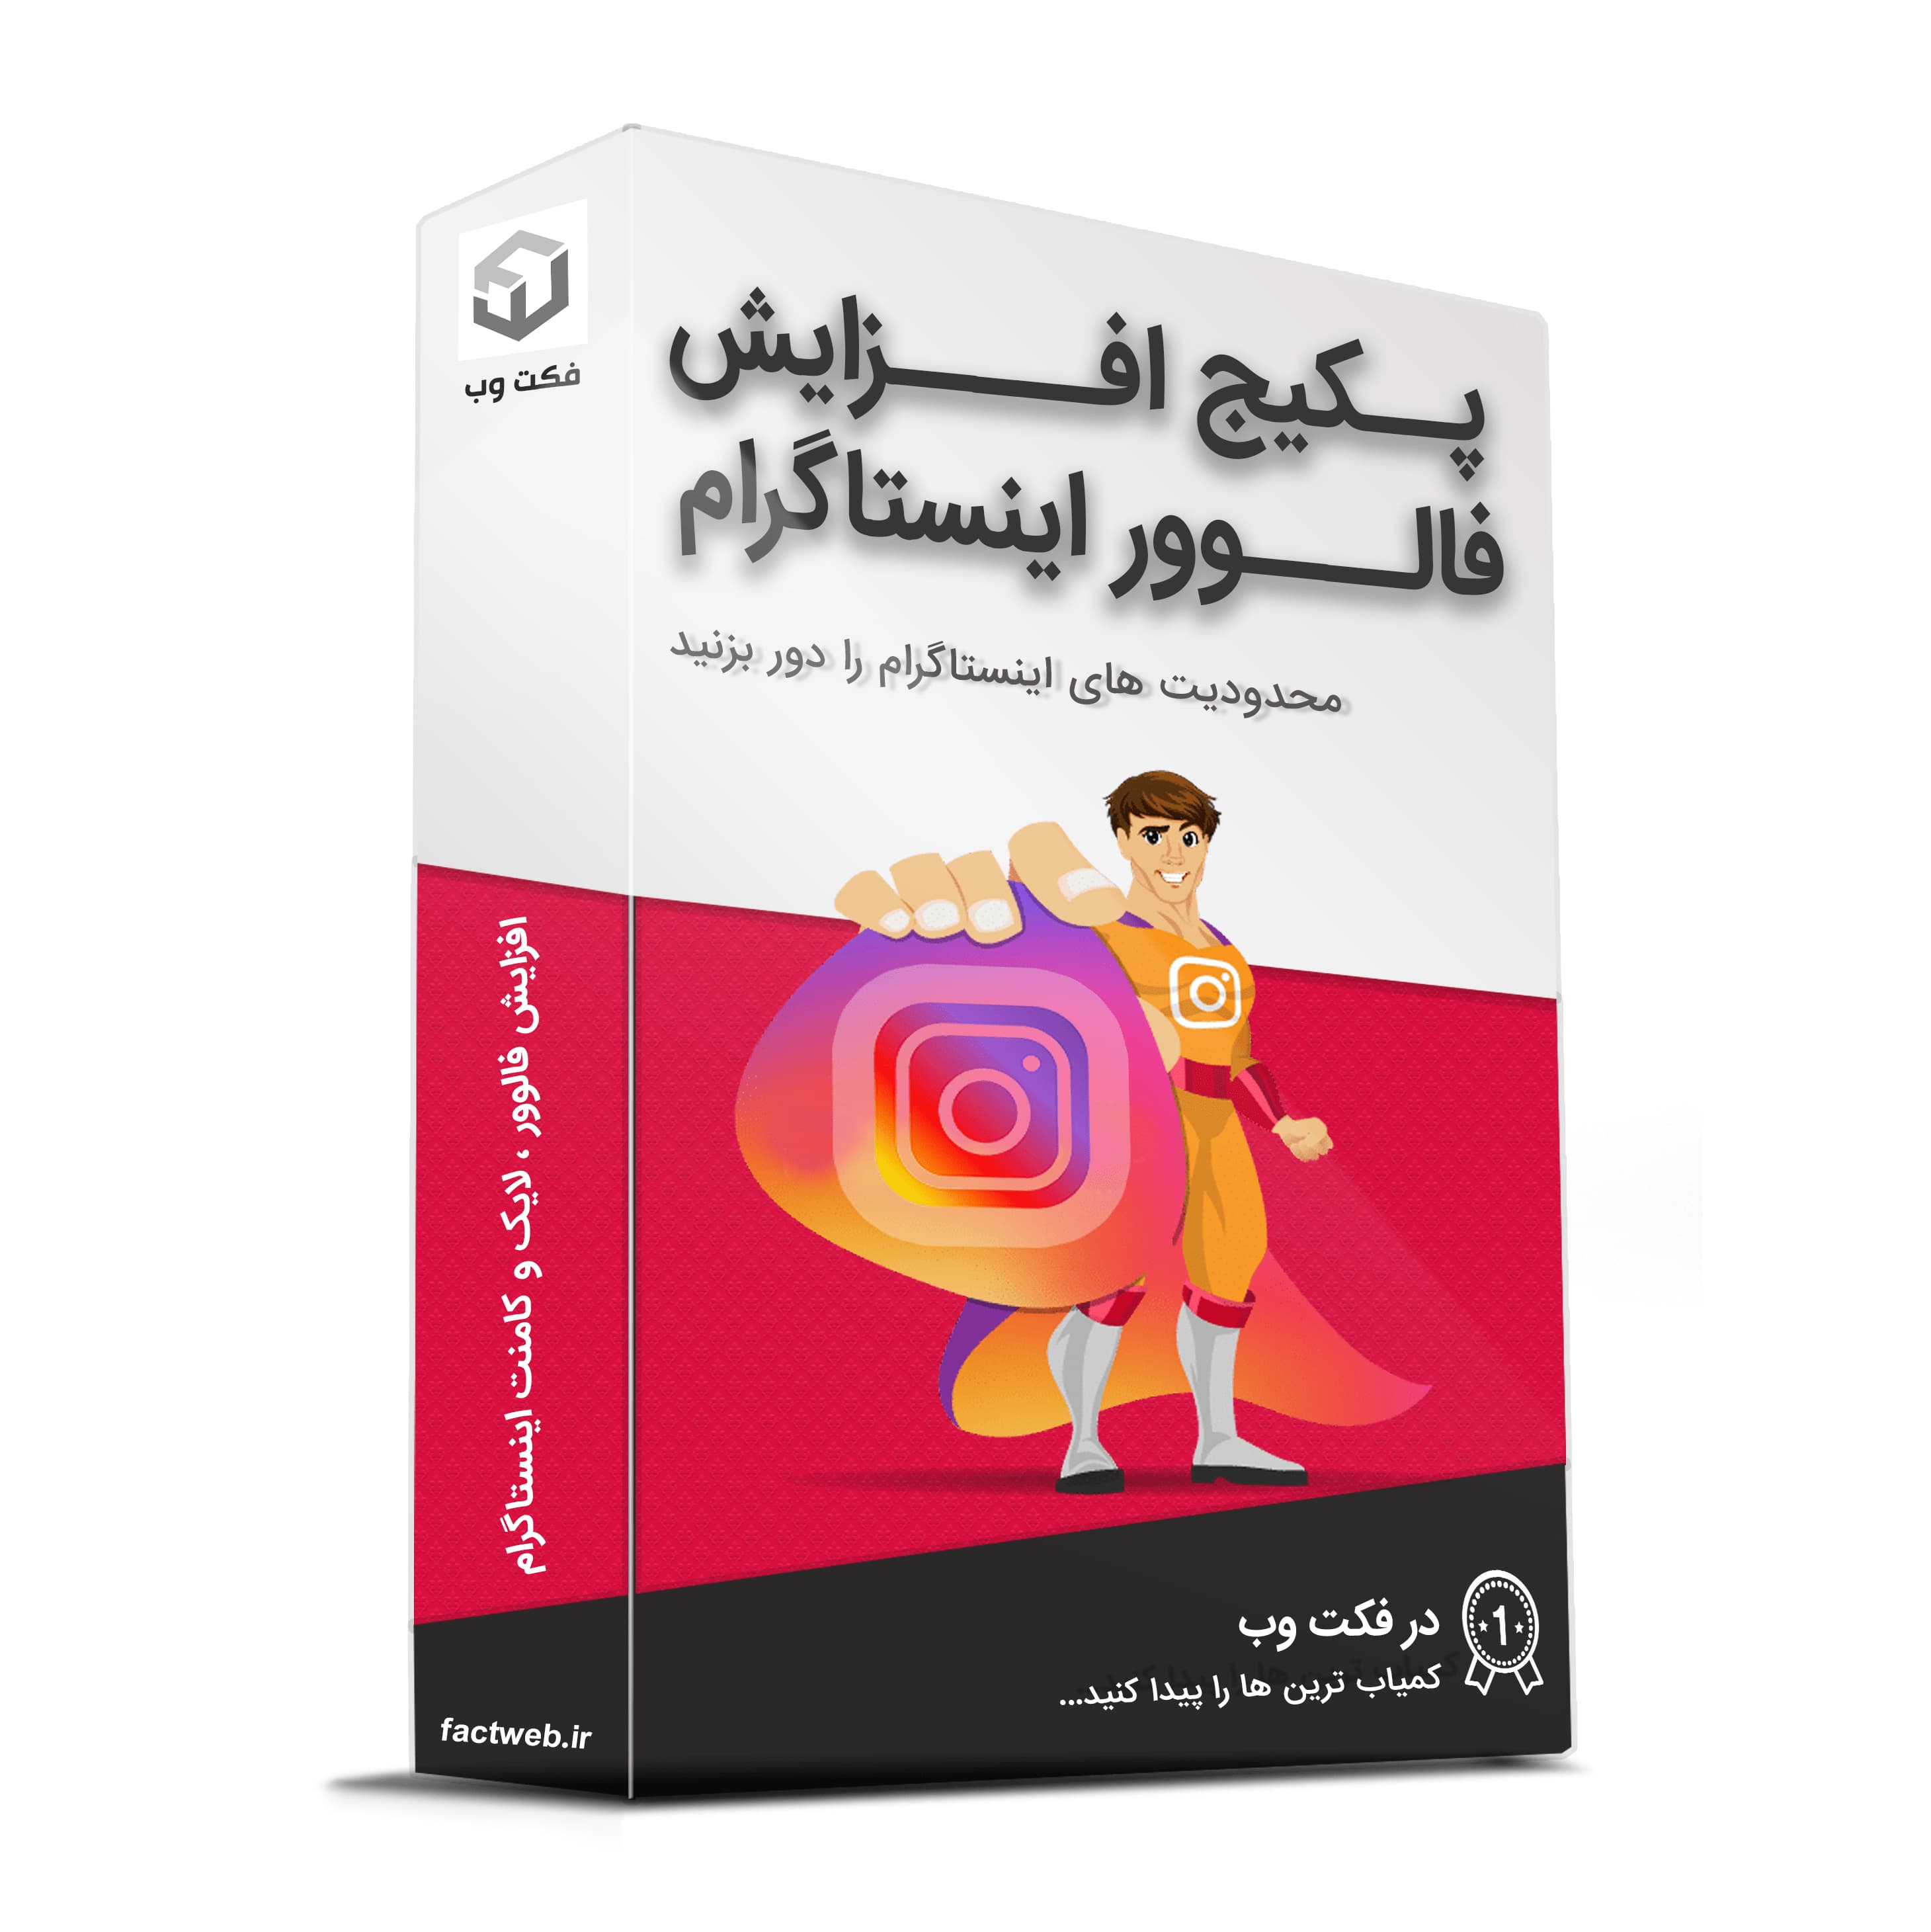 increase-the-followers-likes-and-comments-instagram.jpg